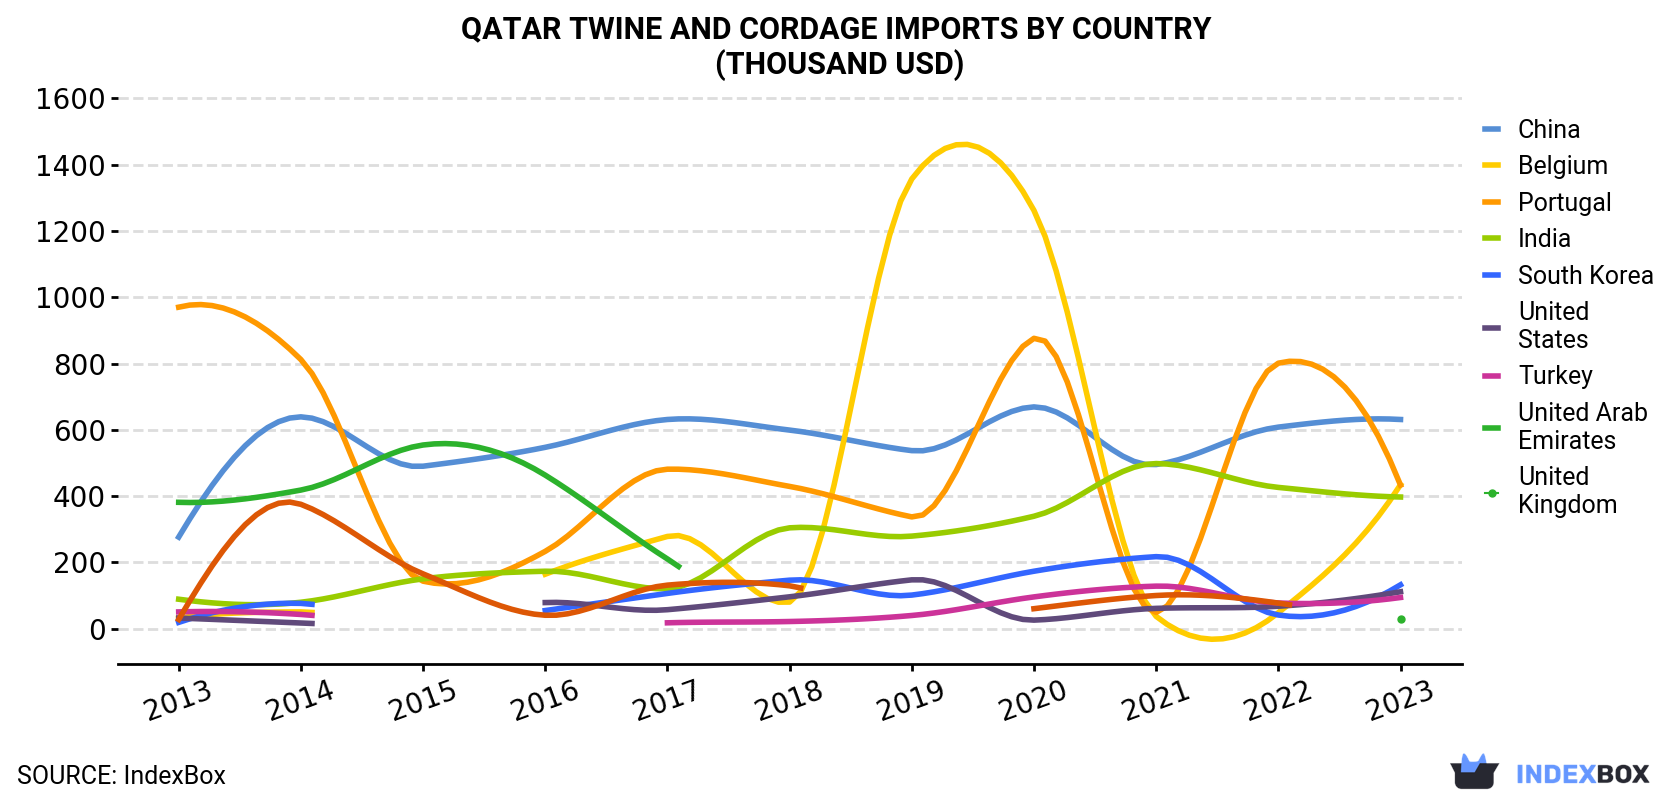 Qatar Twine And Cordage Imports By Country (Thousand USD)